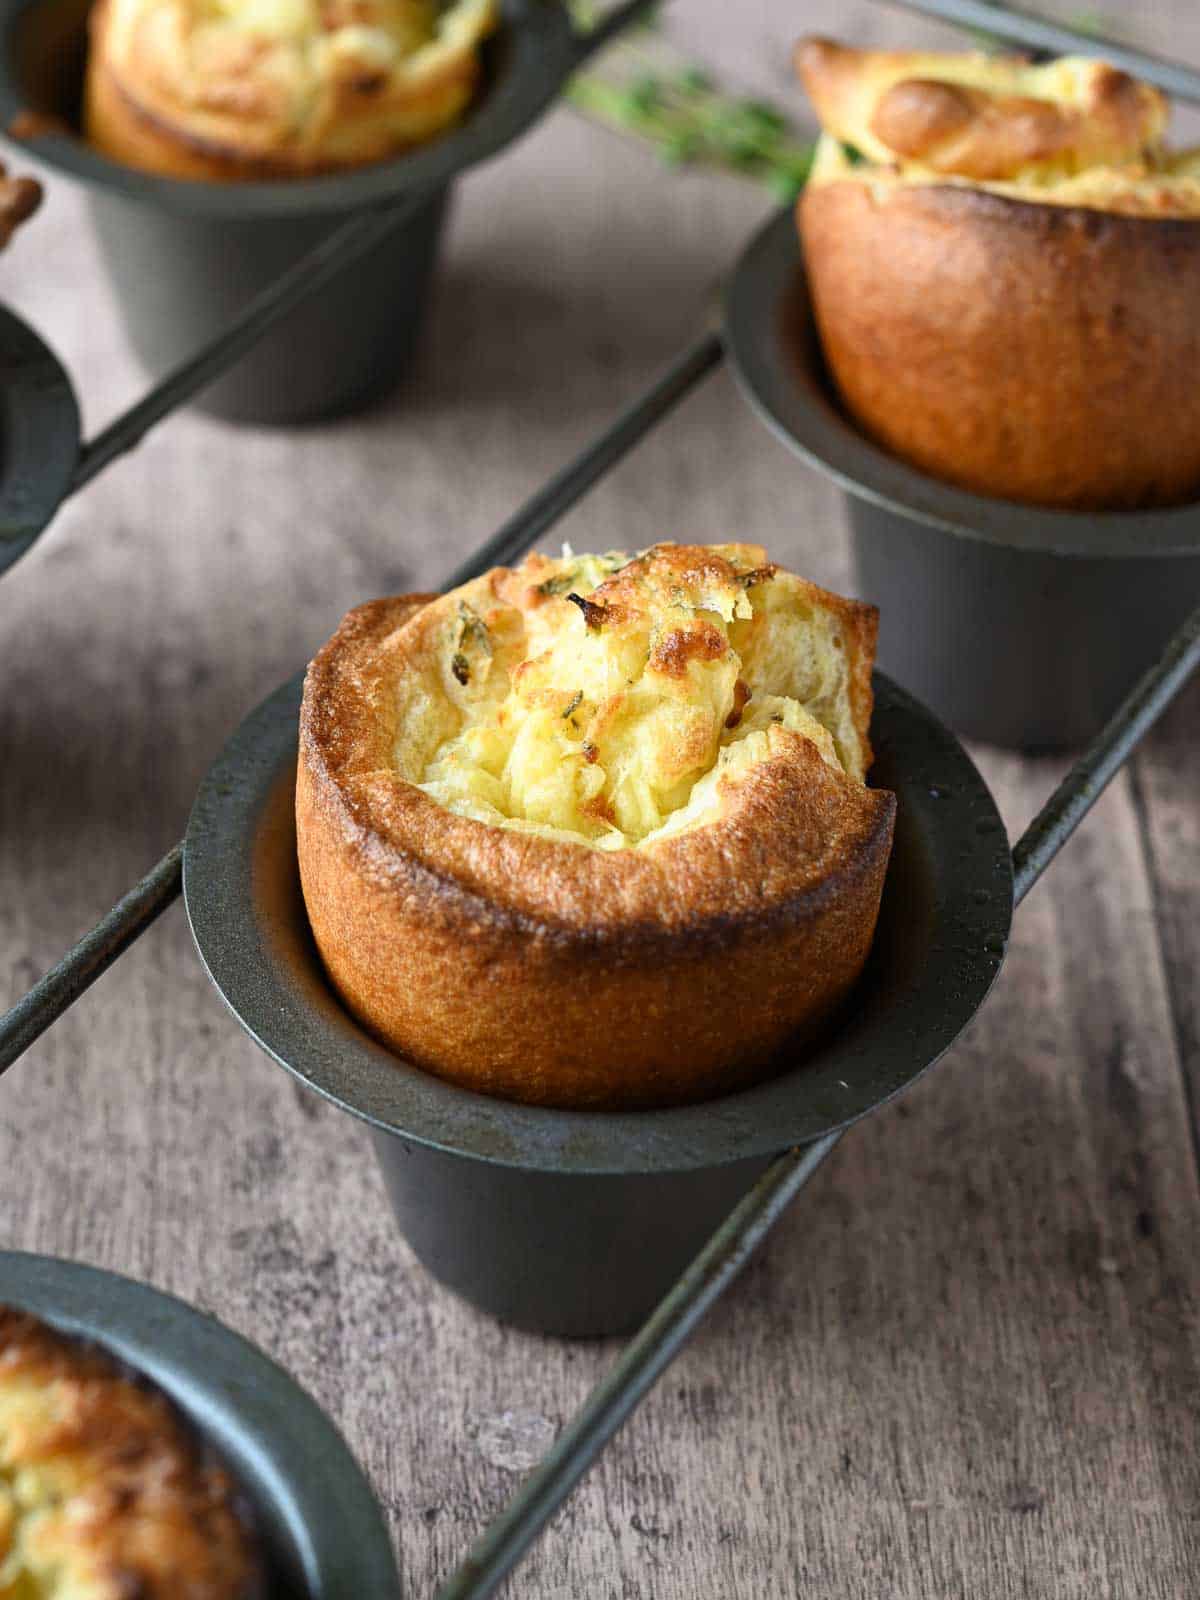 Lemon and thyme popovers in a popover pan on a wooden surface.